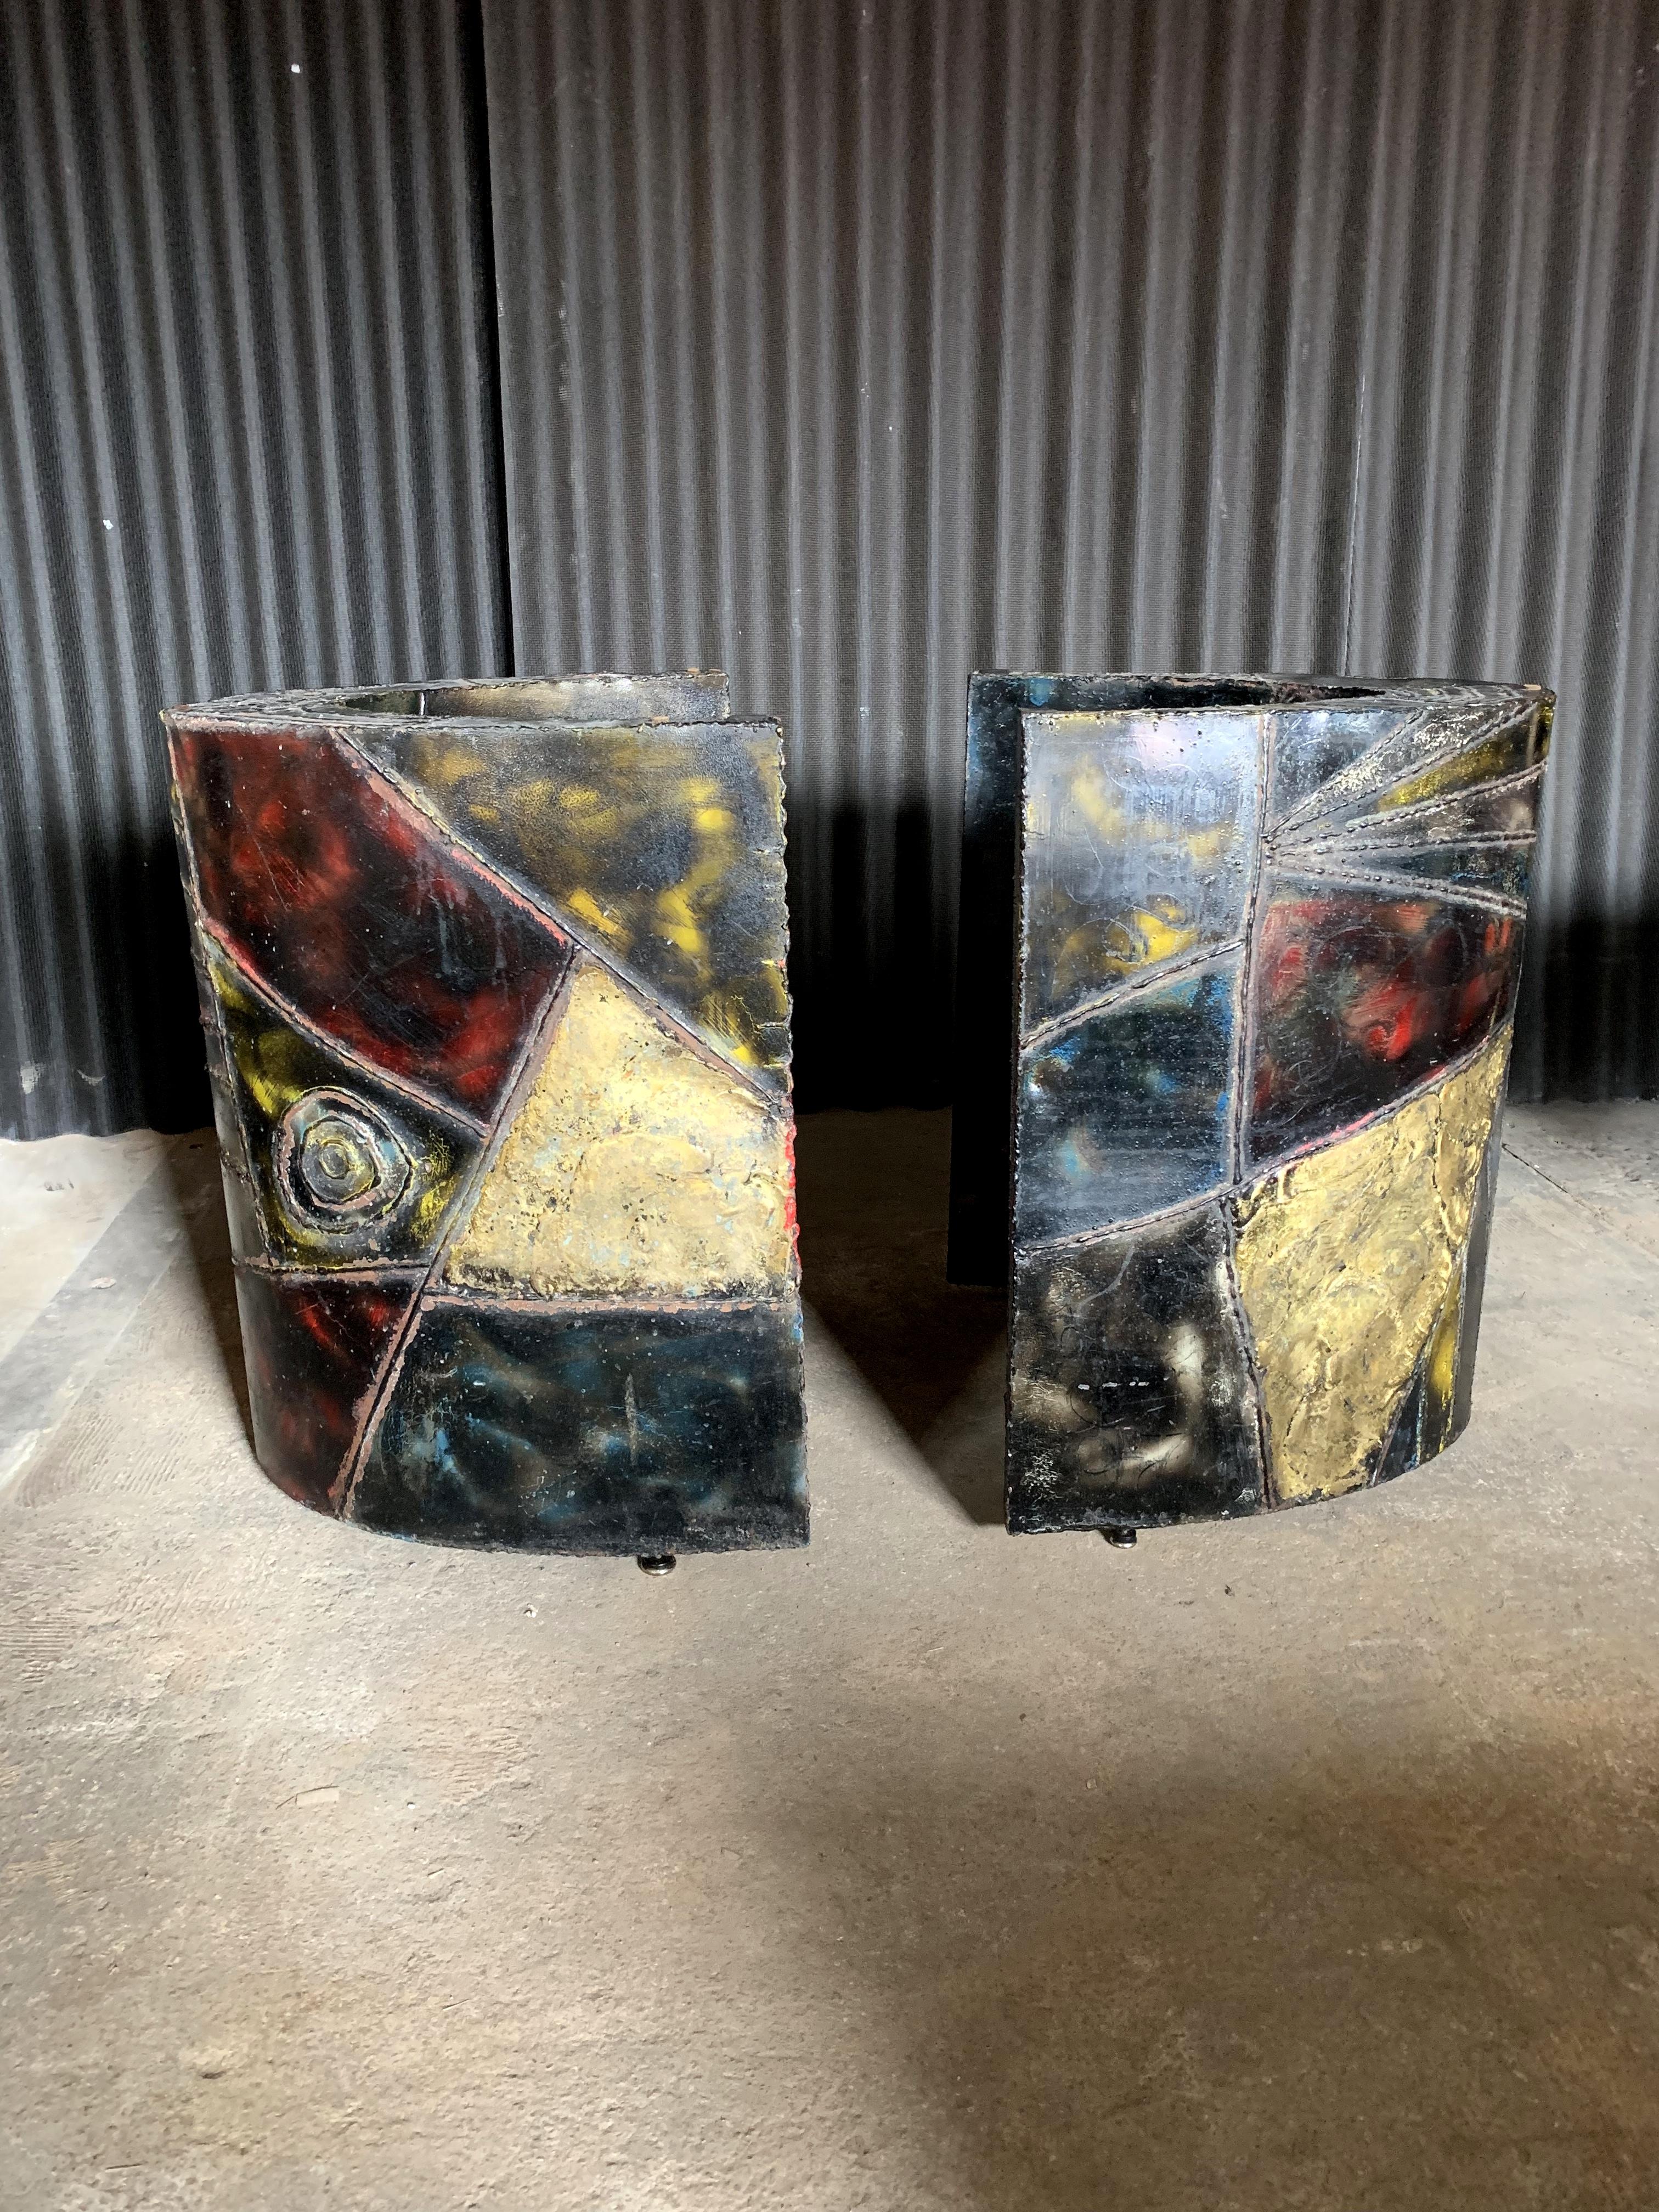 I adore these bases and am amazed at the craftsmanship it took to create them.
Each one is in wonderful condition with normal wear as expected with these pieces.
I cannot locate a signature.
Please see all photos. There is one area that has more